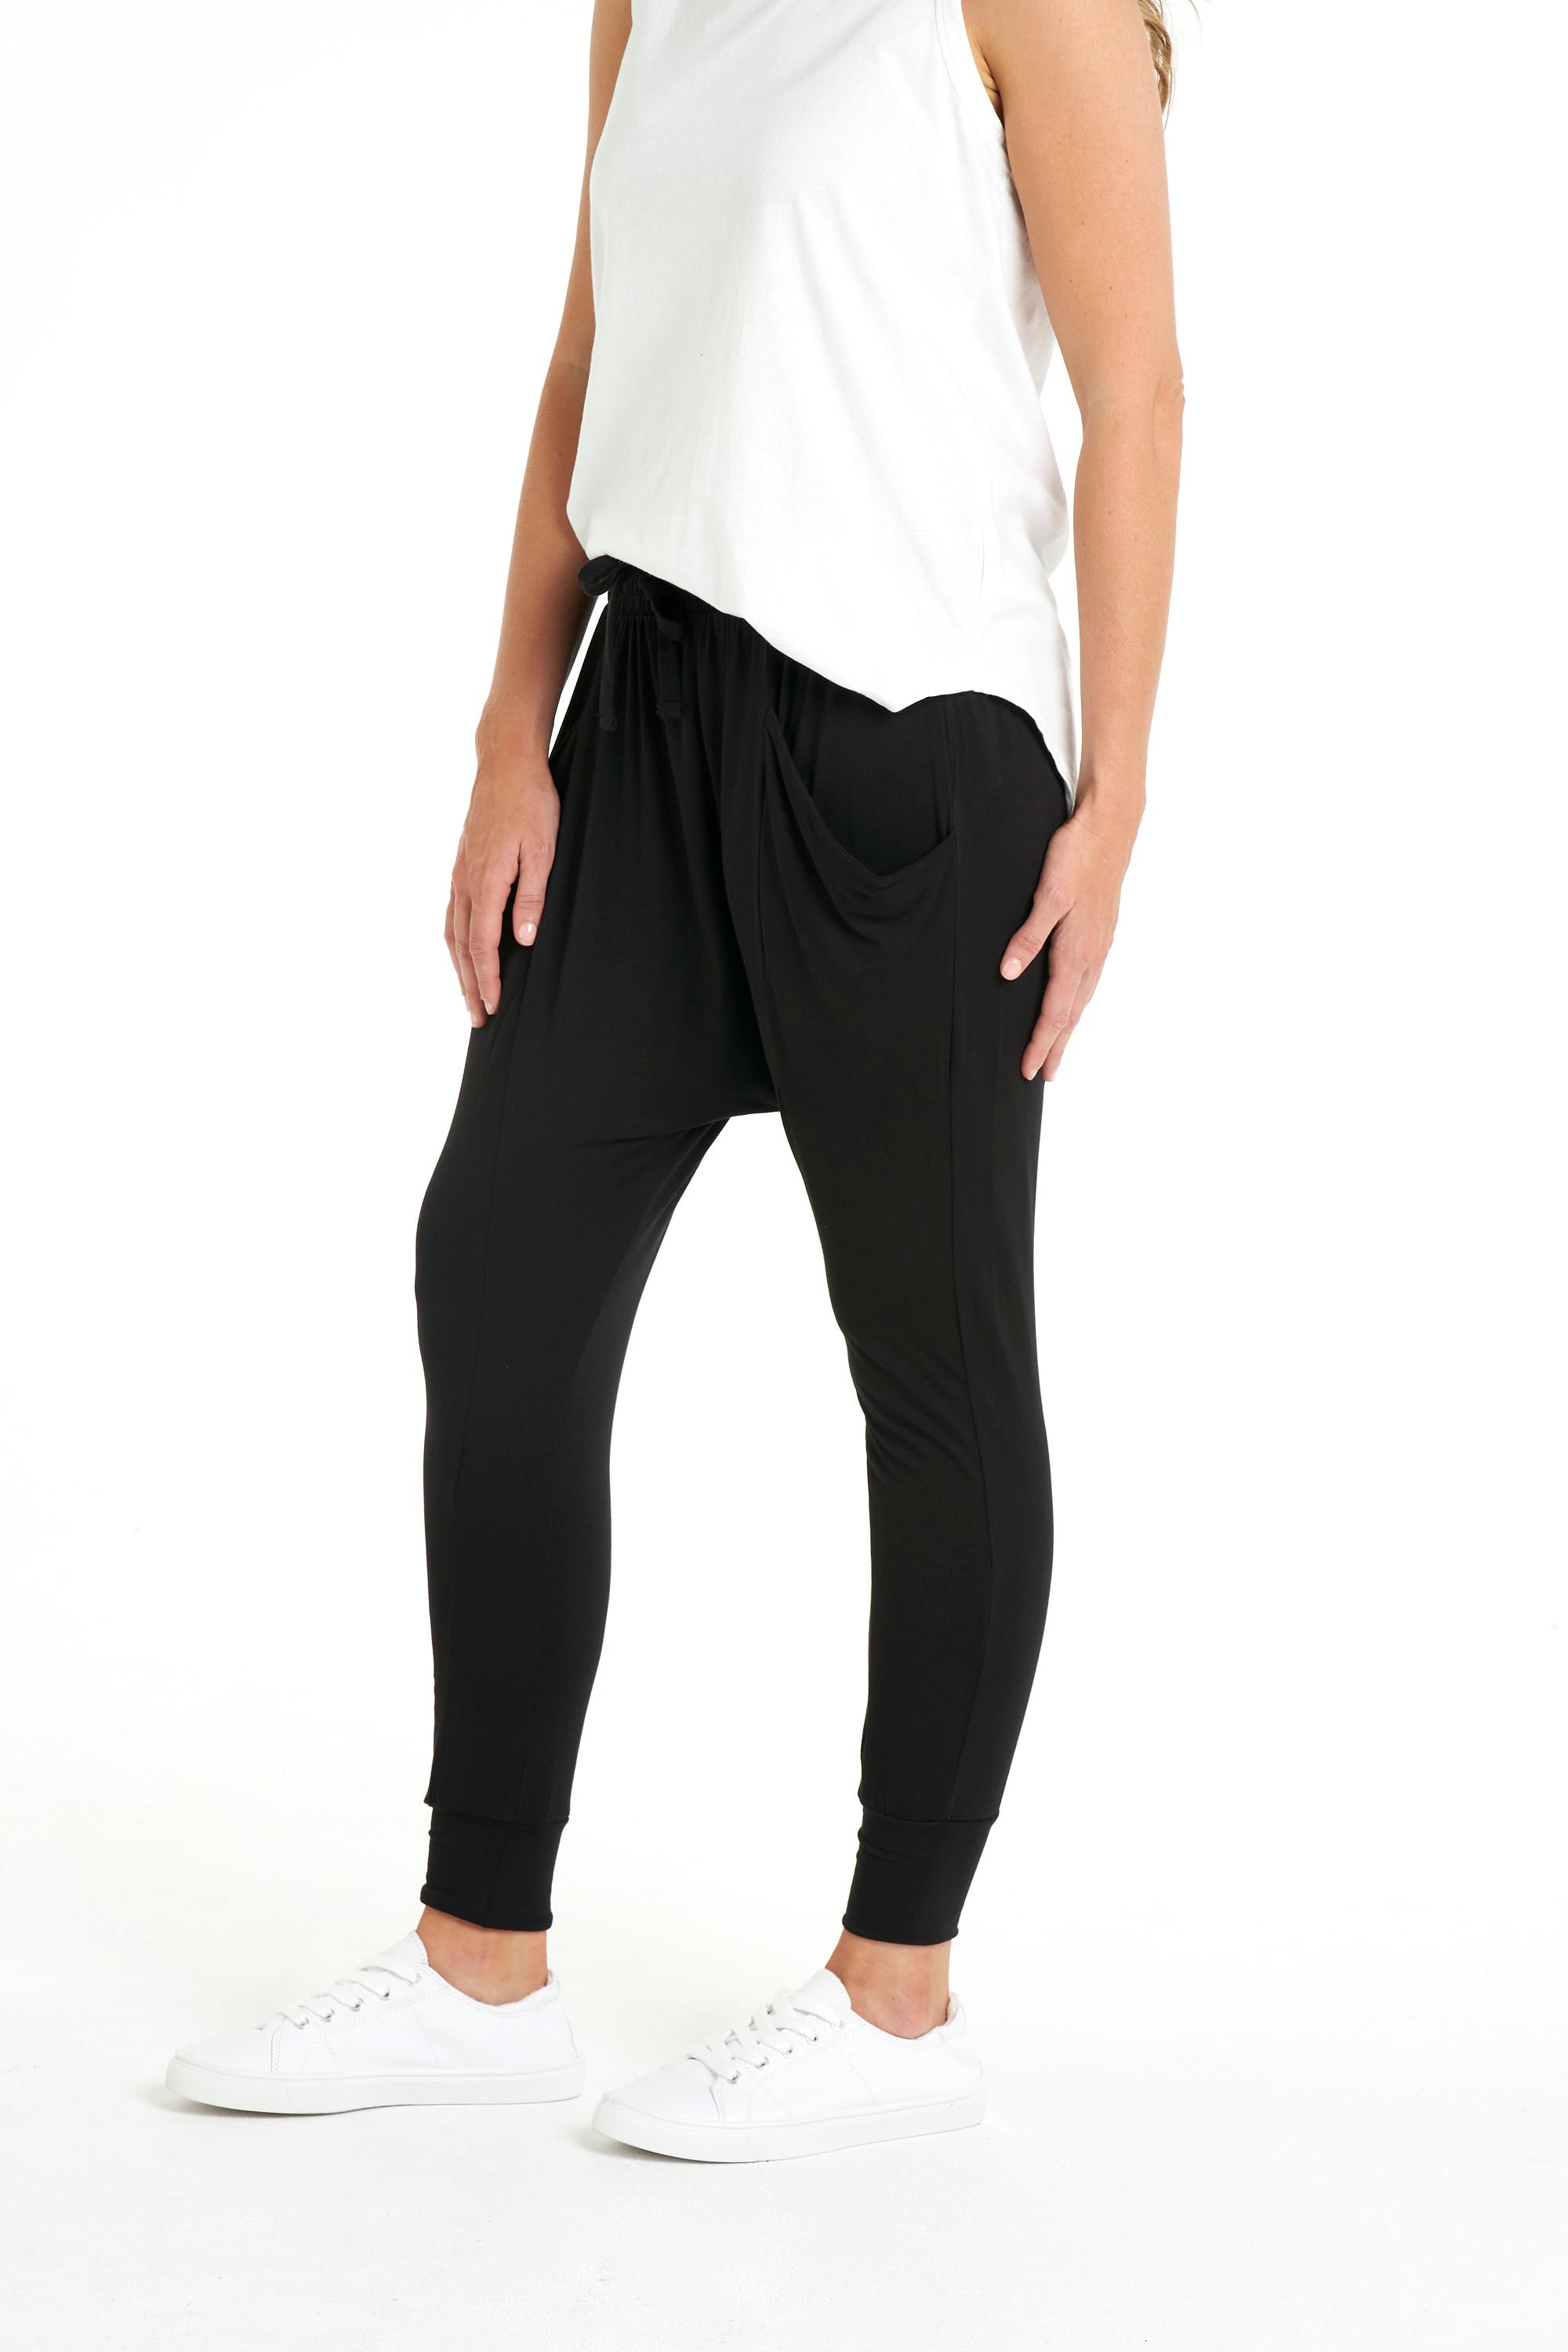 Barcelona Stretchy Relaxed Draped Jogger Pant - Black